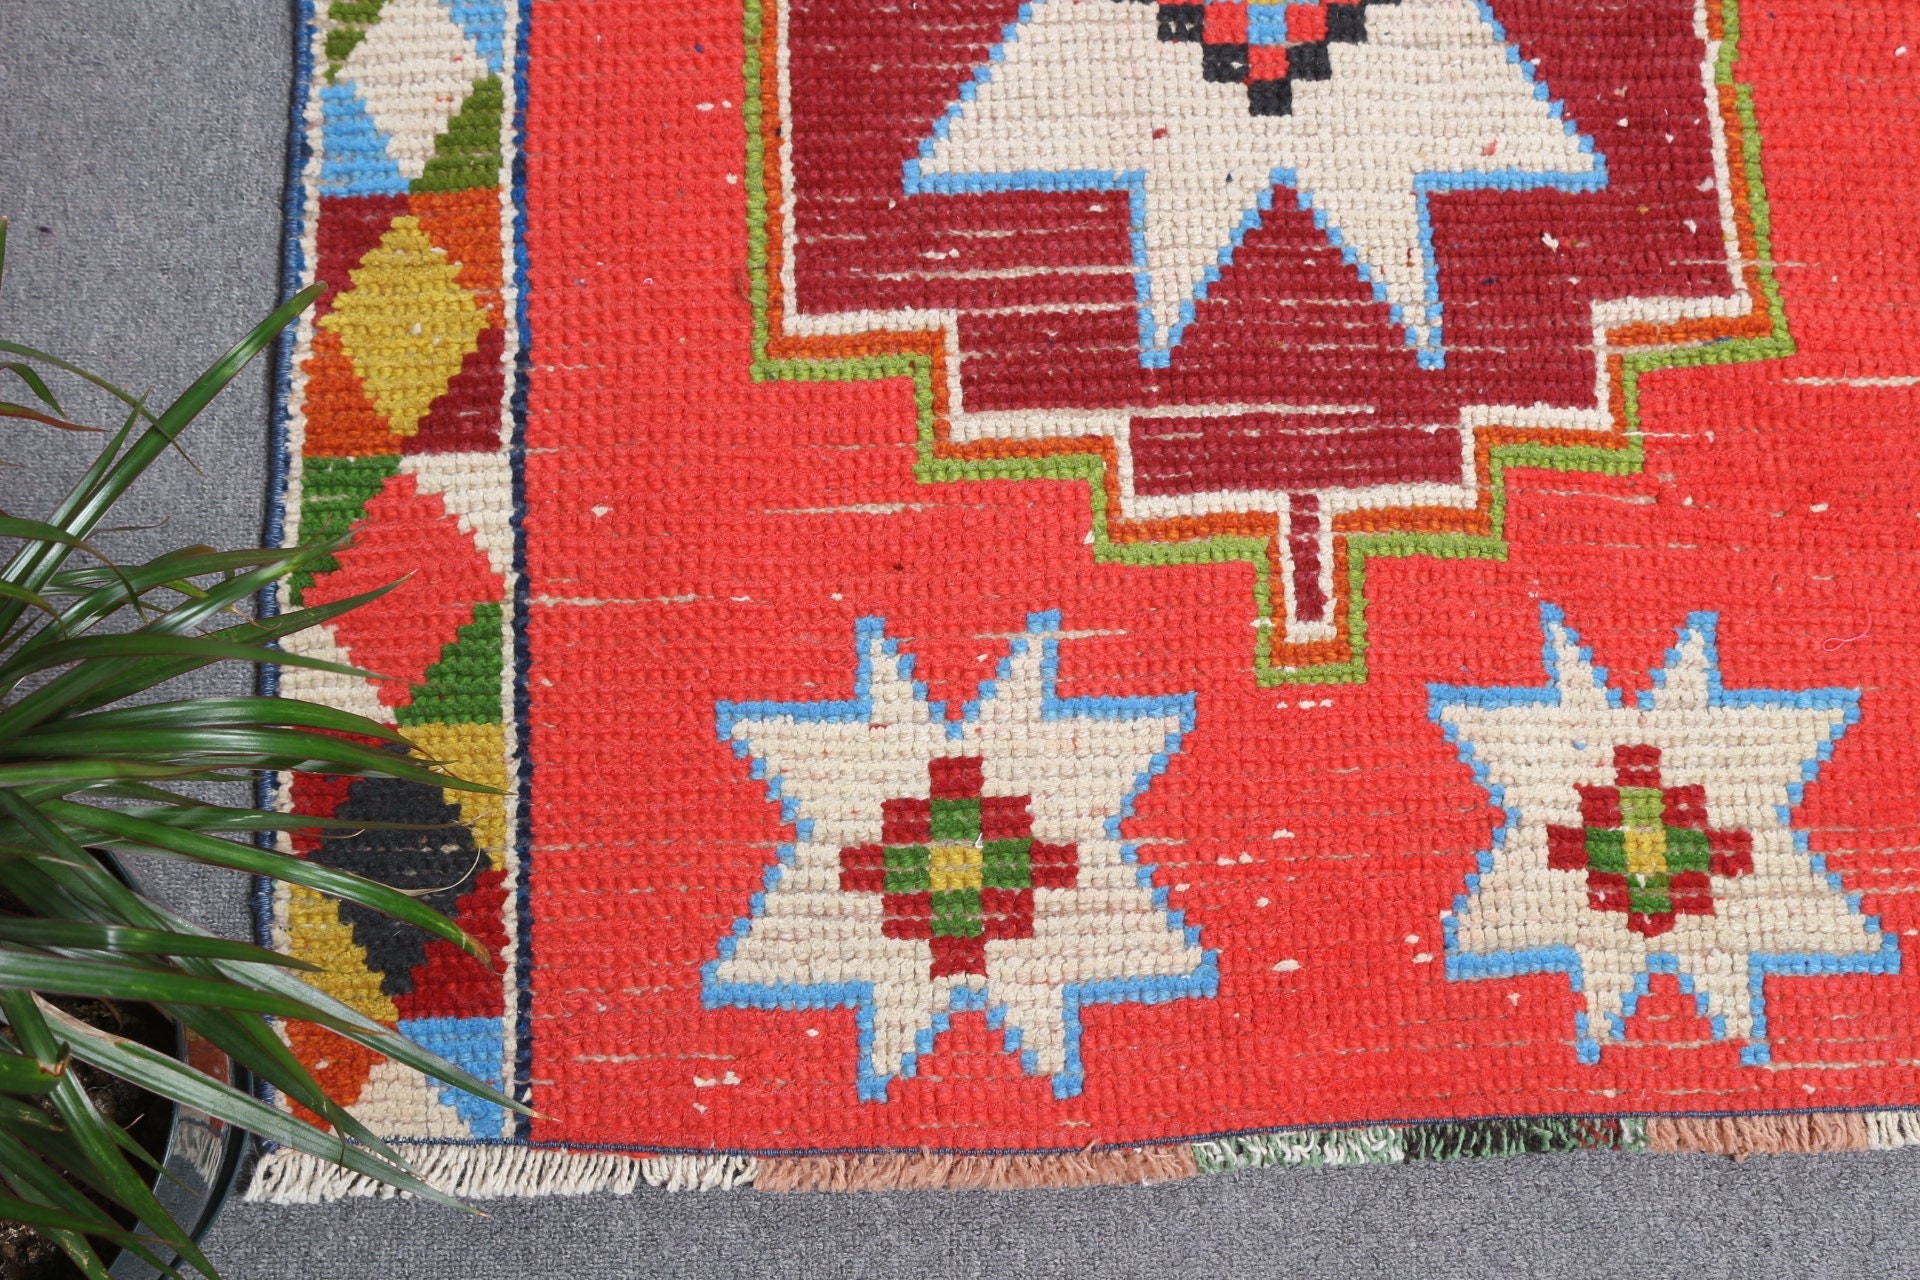 Entry Rug, Vintage Rug, Rugs for Kitchen, Antique Rug, Red  3.1x2.6 ft Small Rug, Turkish Rug, Nursery Rugs